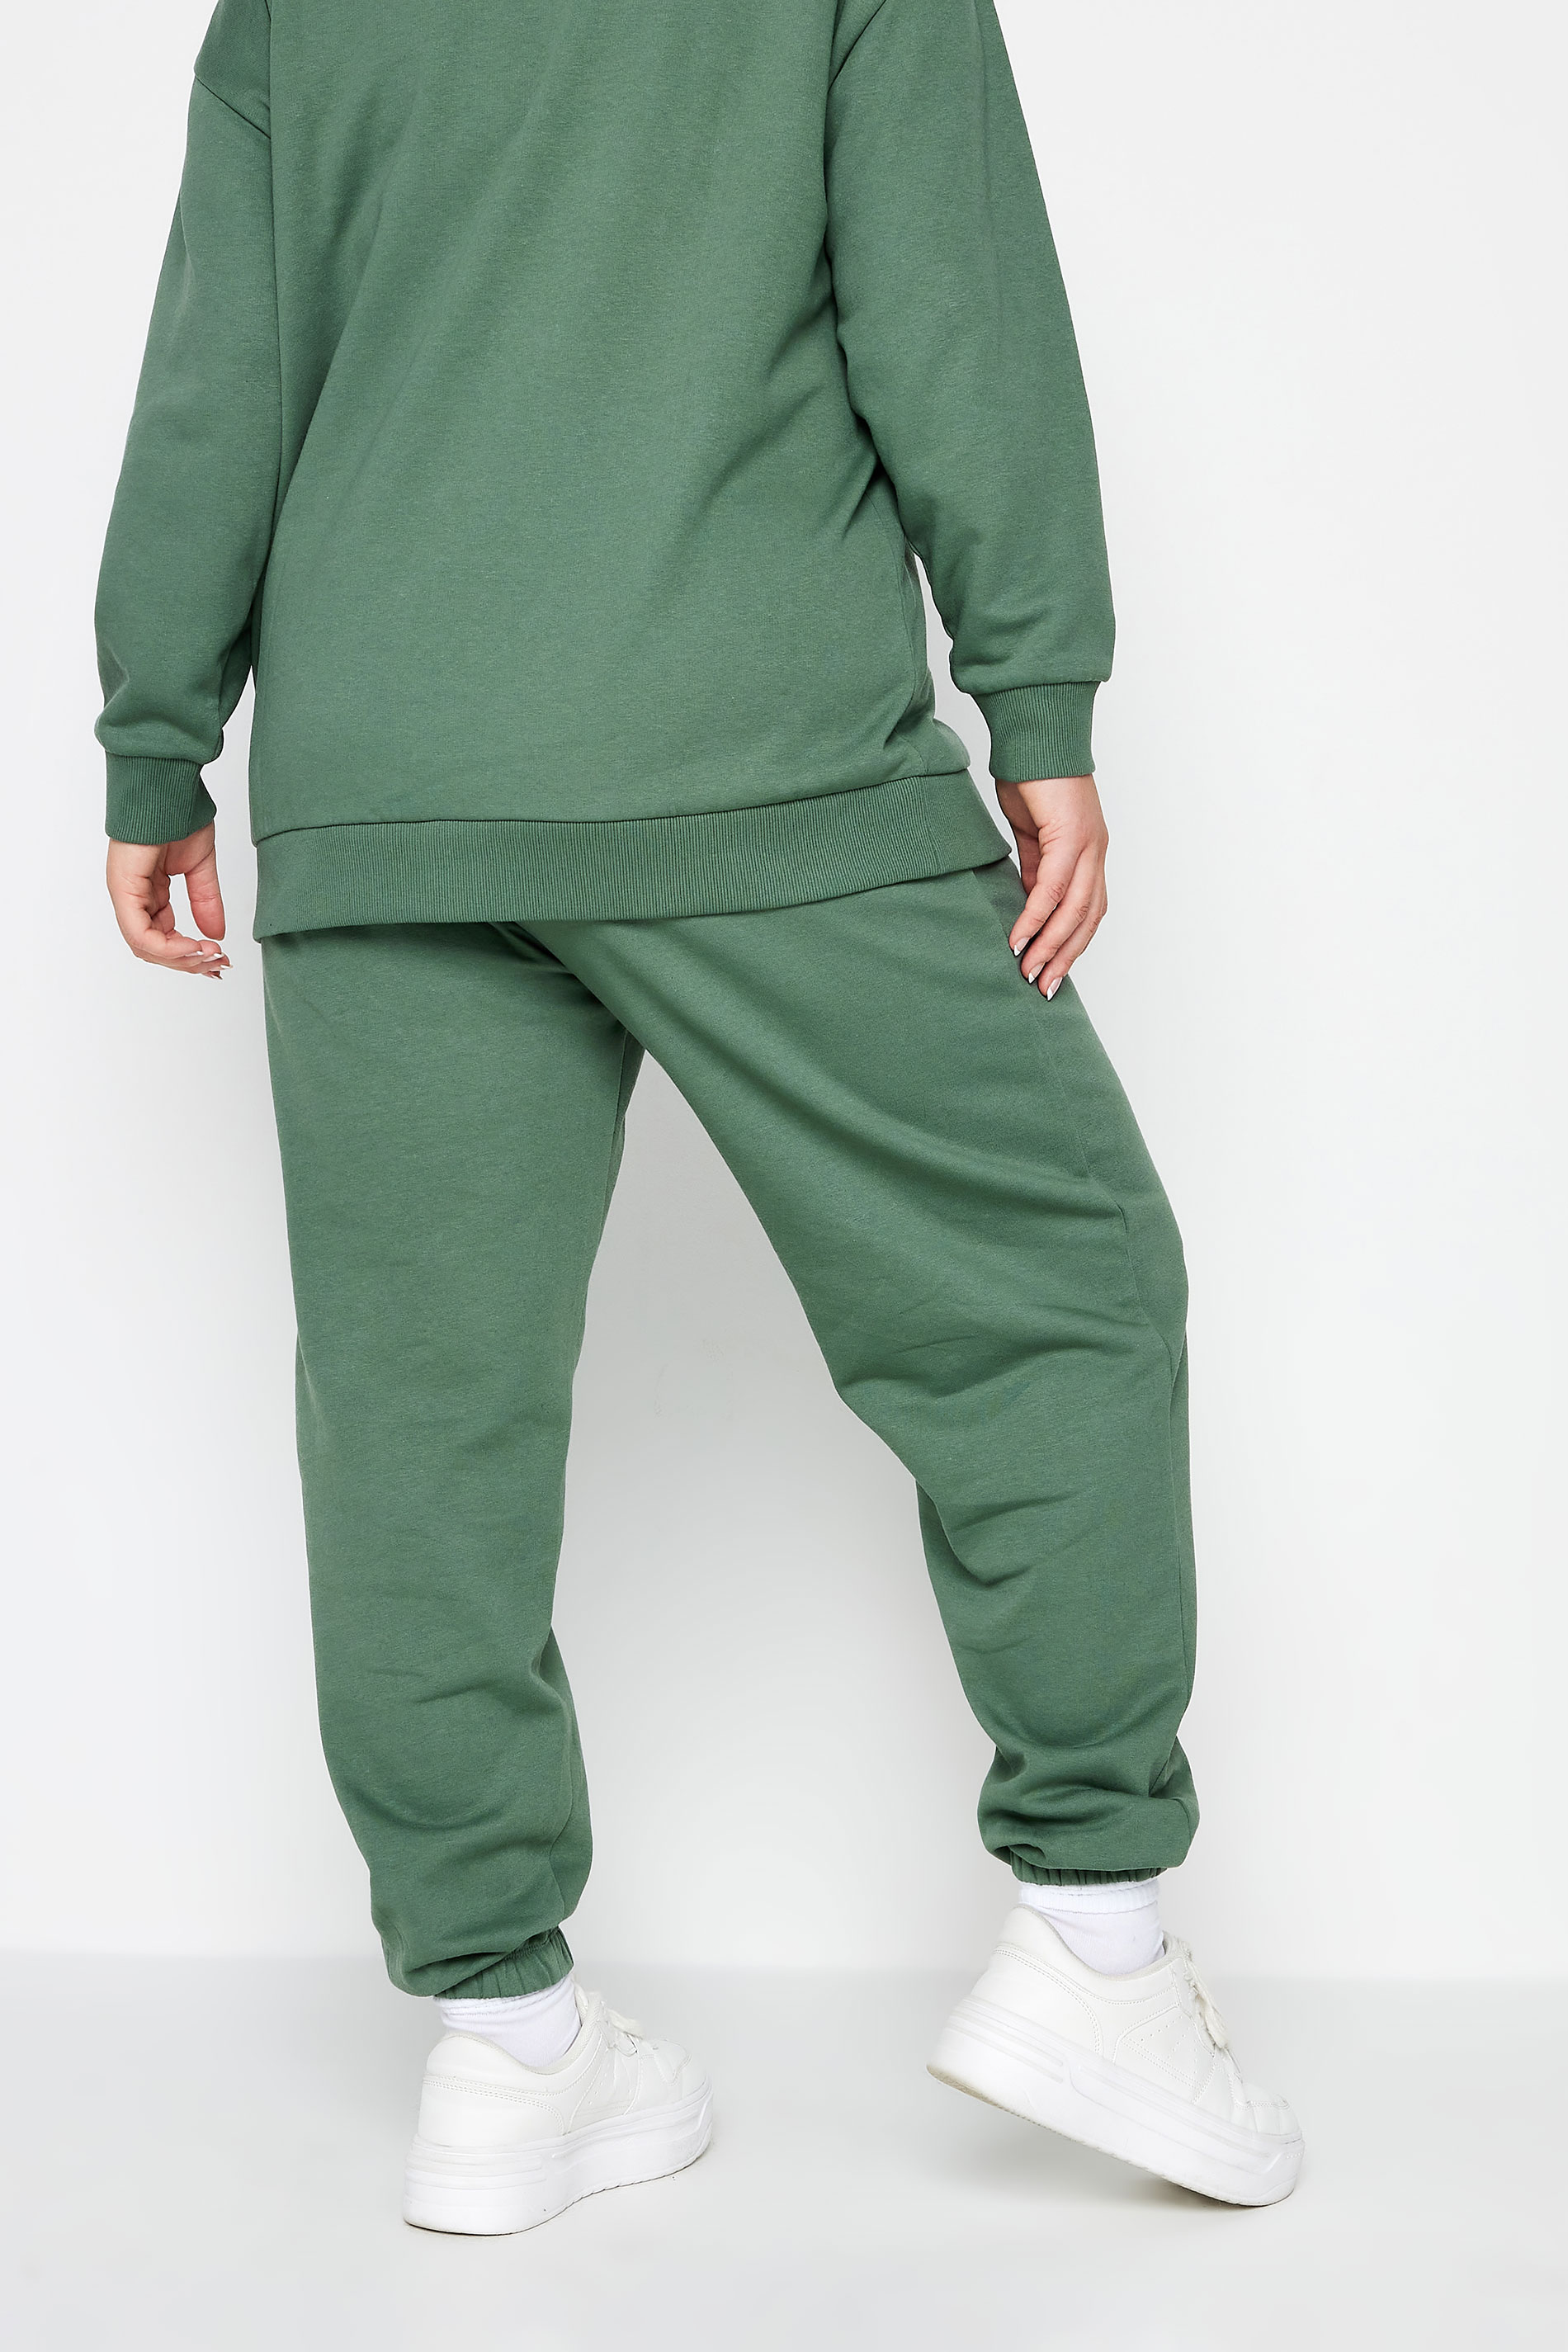 YOURS Plus Size Green Cuffed Joggers | Yours Clothing 3